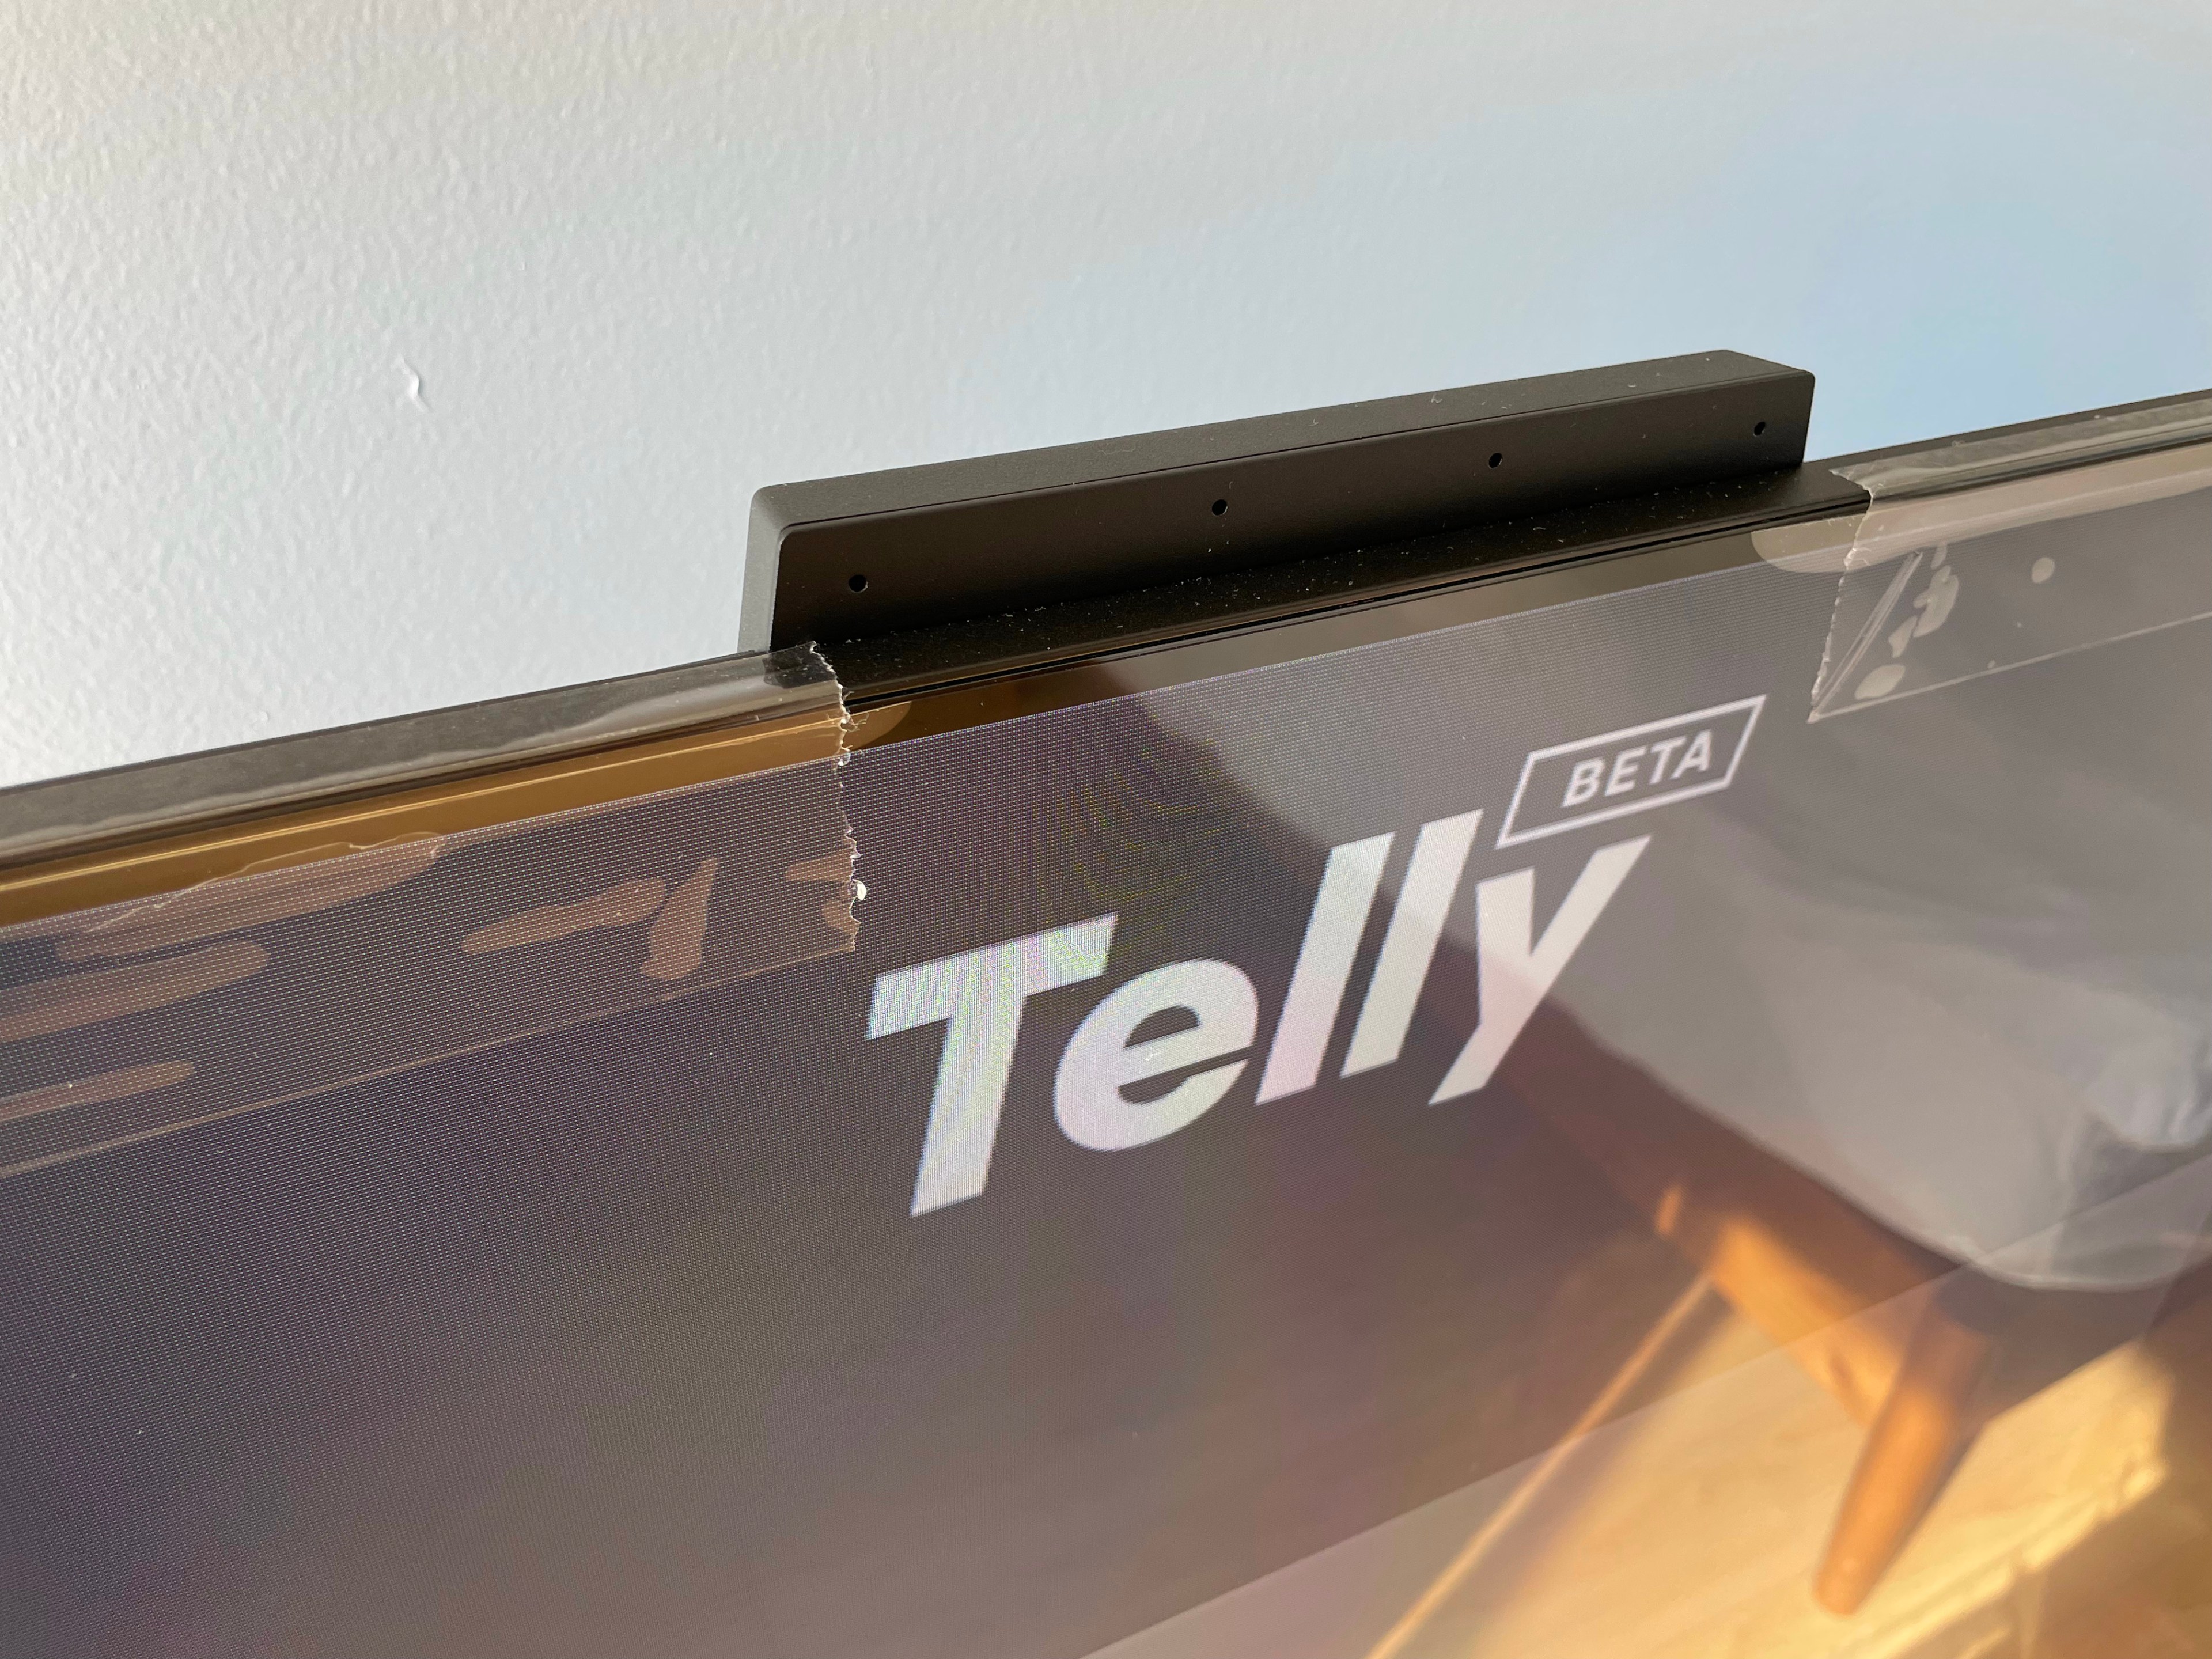 The Telly logo can be seen in close up